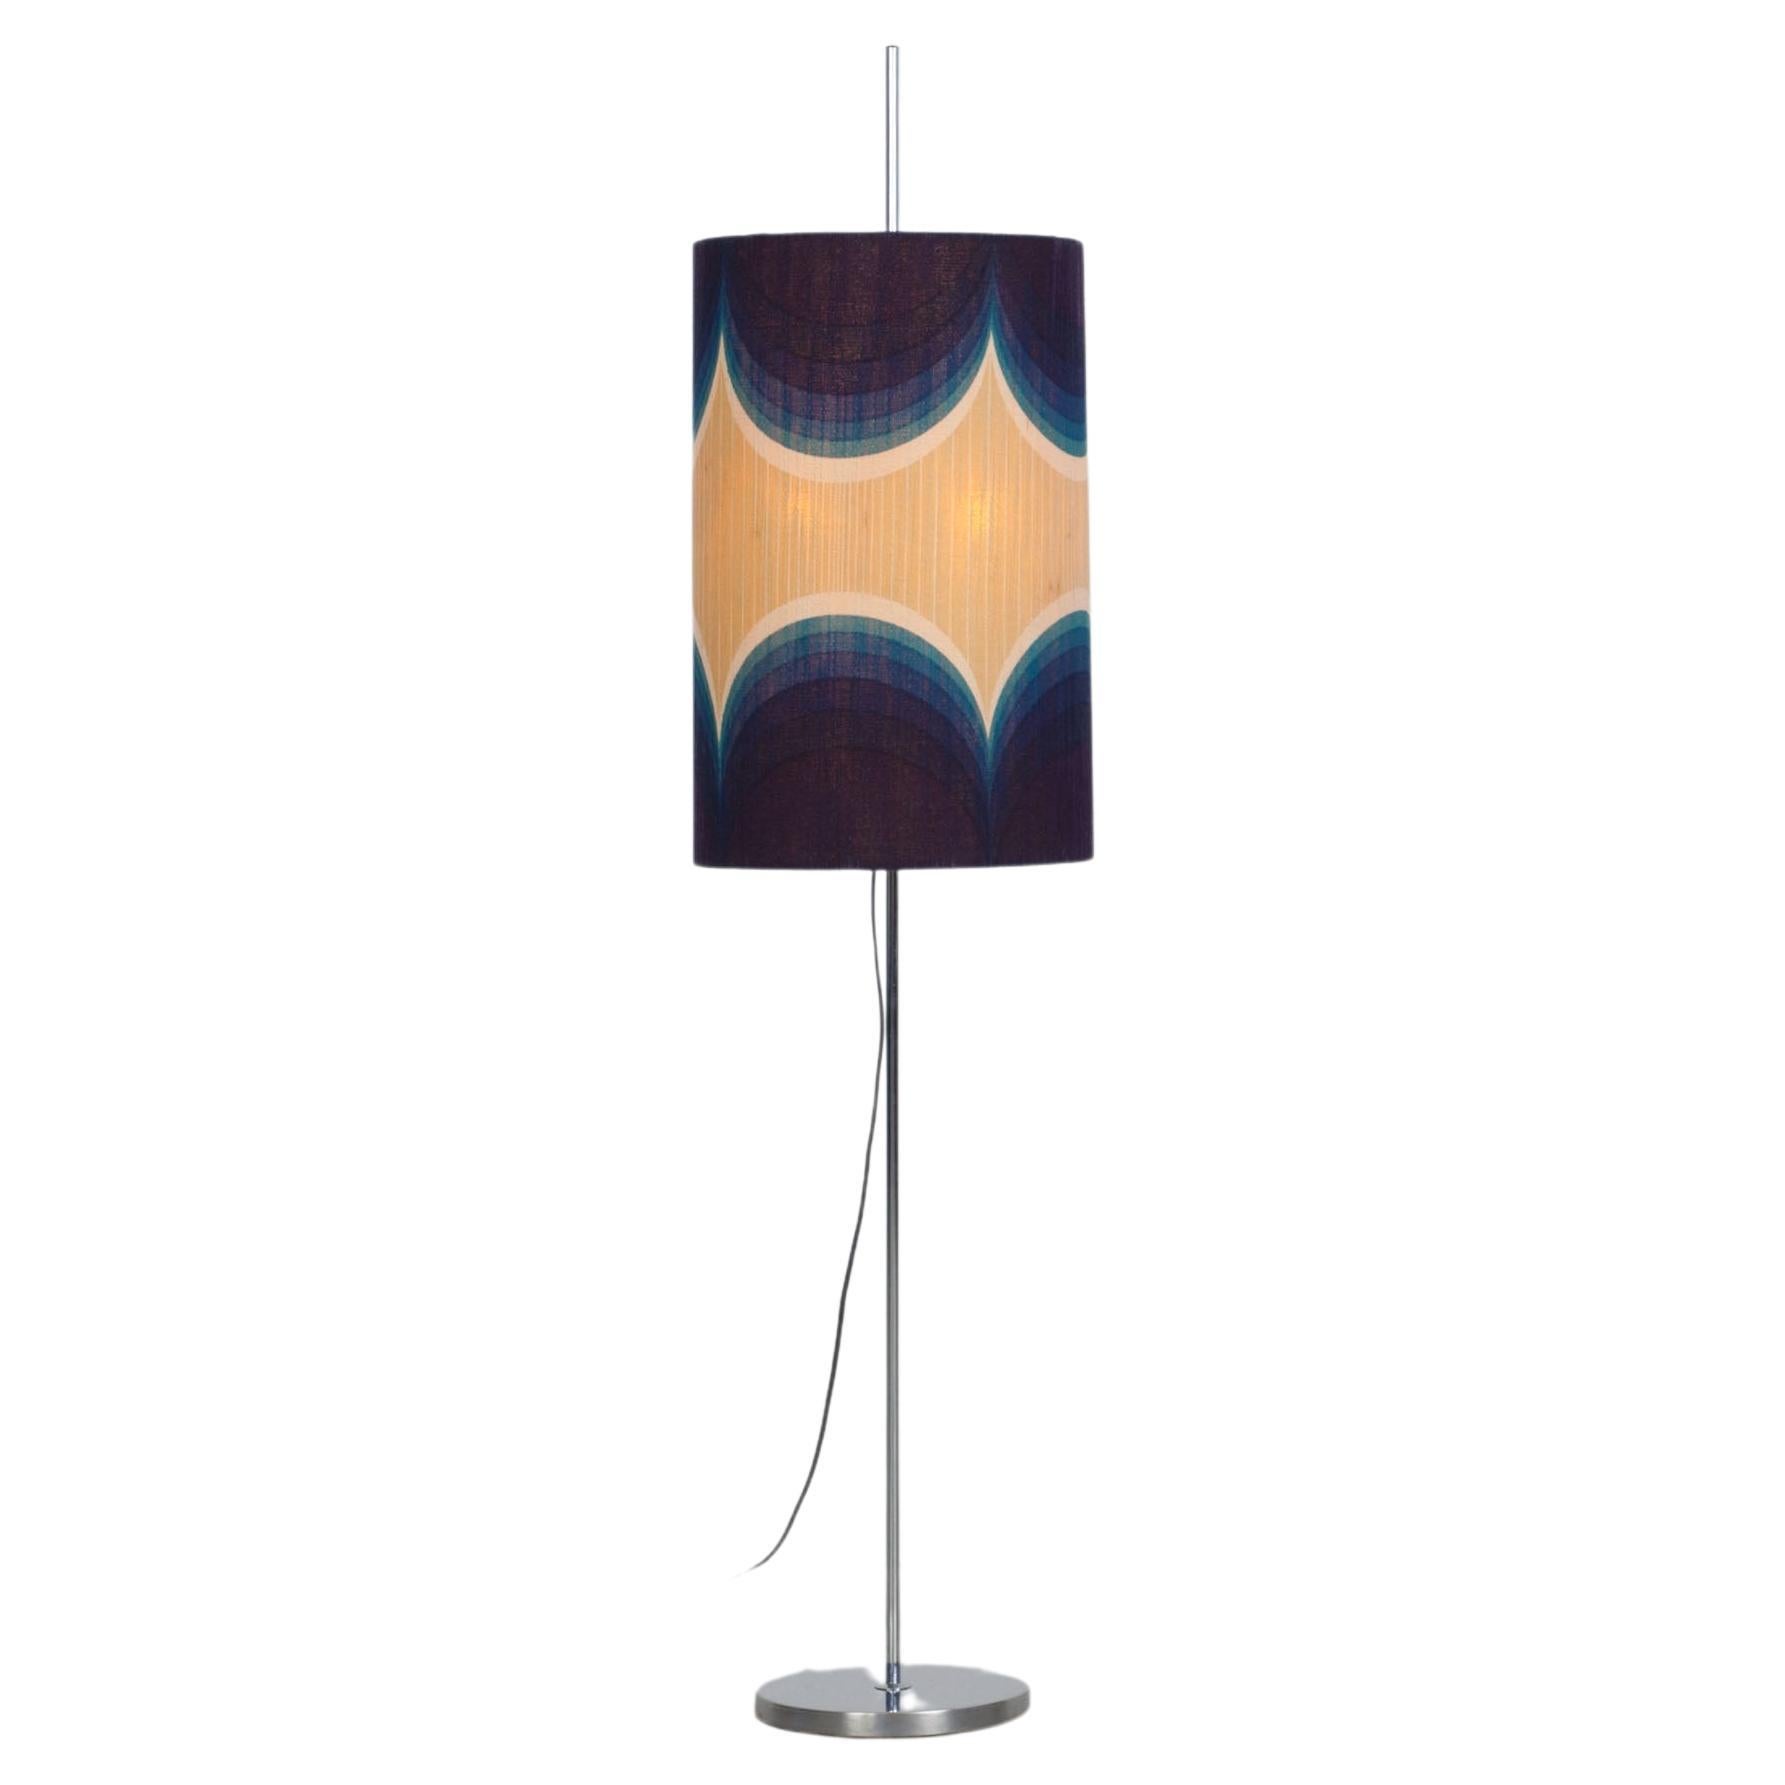 German Floor Lamp from the 70s